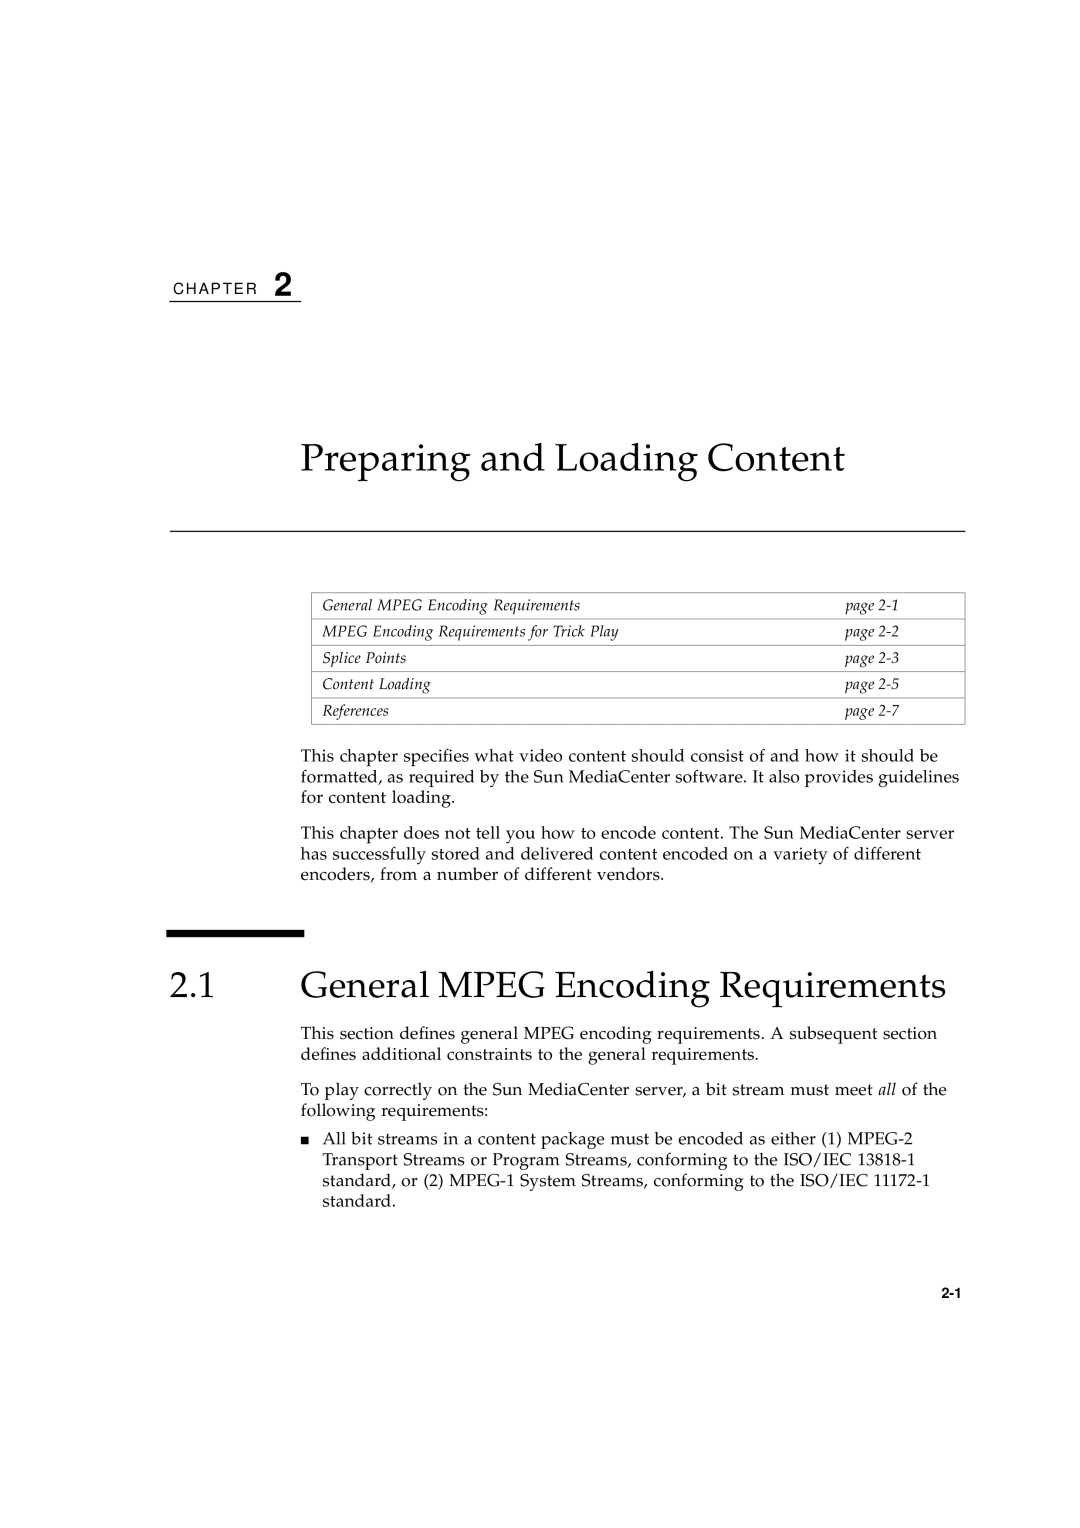 Sun Microsystems 2.1 manual Preparing and Loading Content, General MPEG Encoding Requirements 